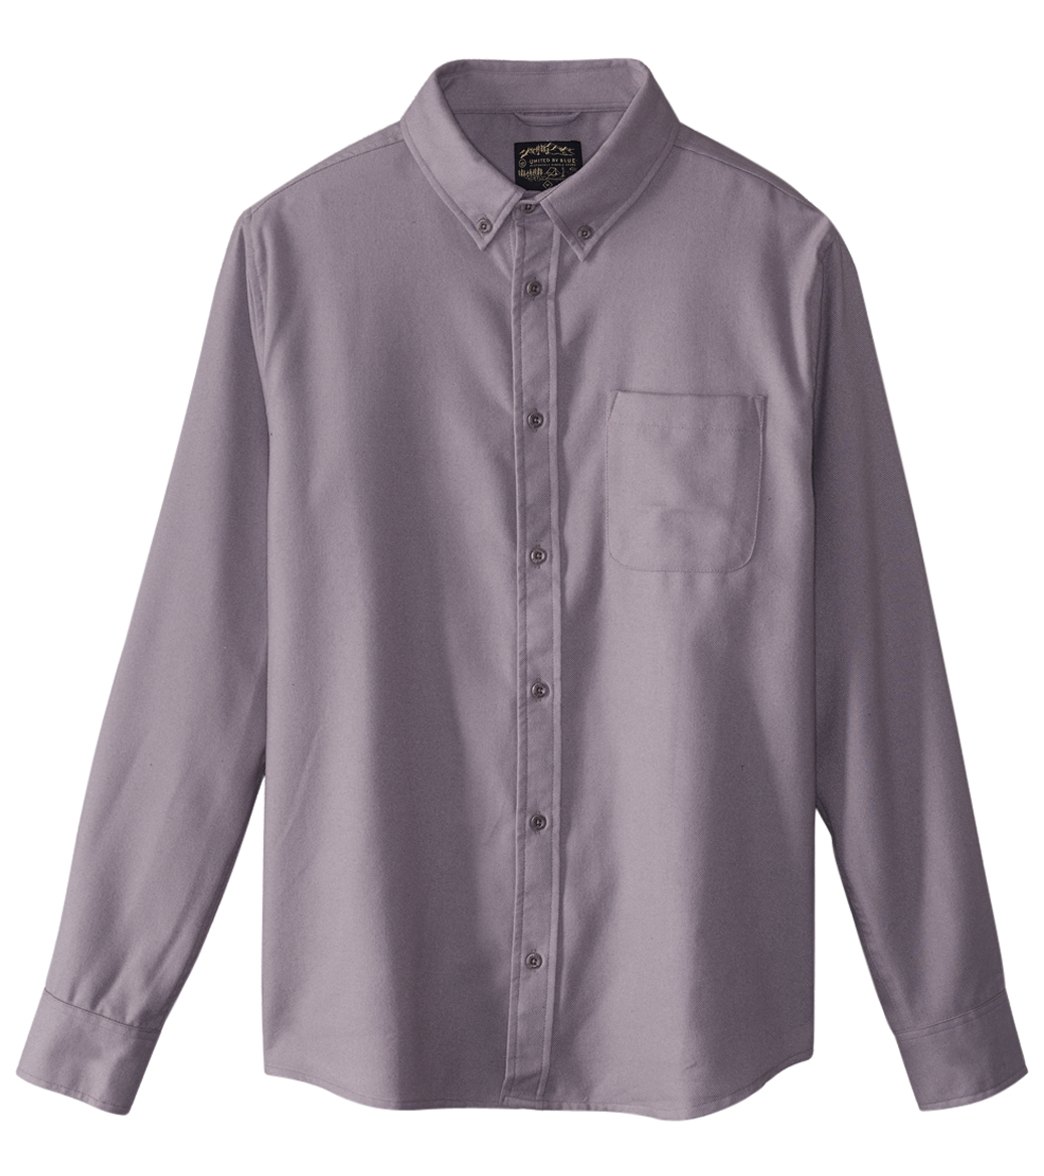 United By Blue Men's Banff Wool Long Sleeve Shirt - Grey Small - Swimoutlet.com